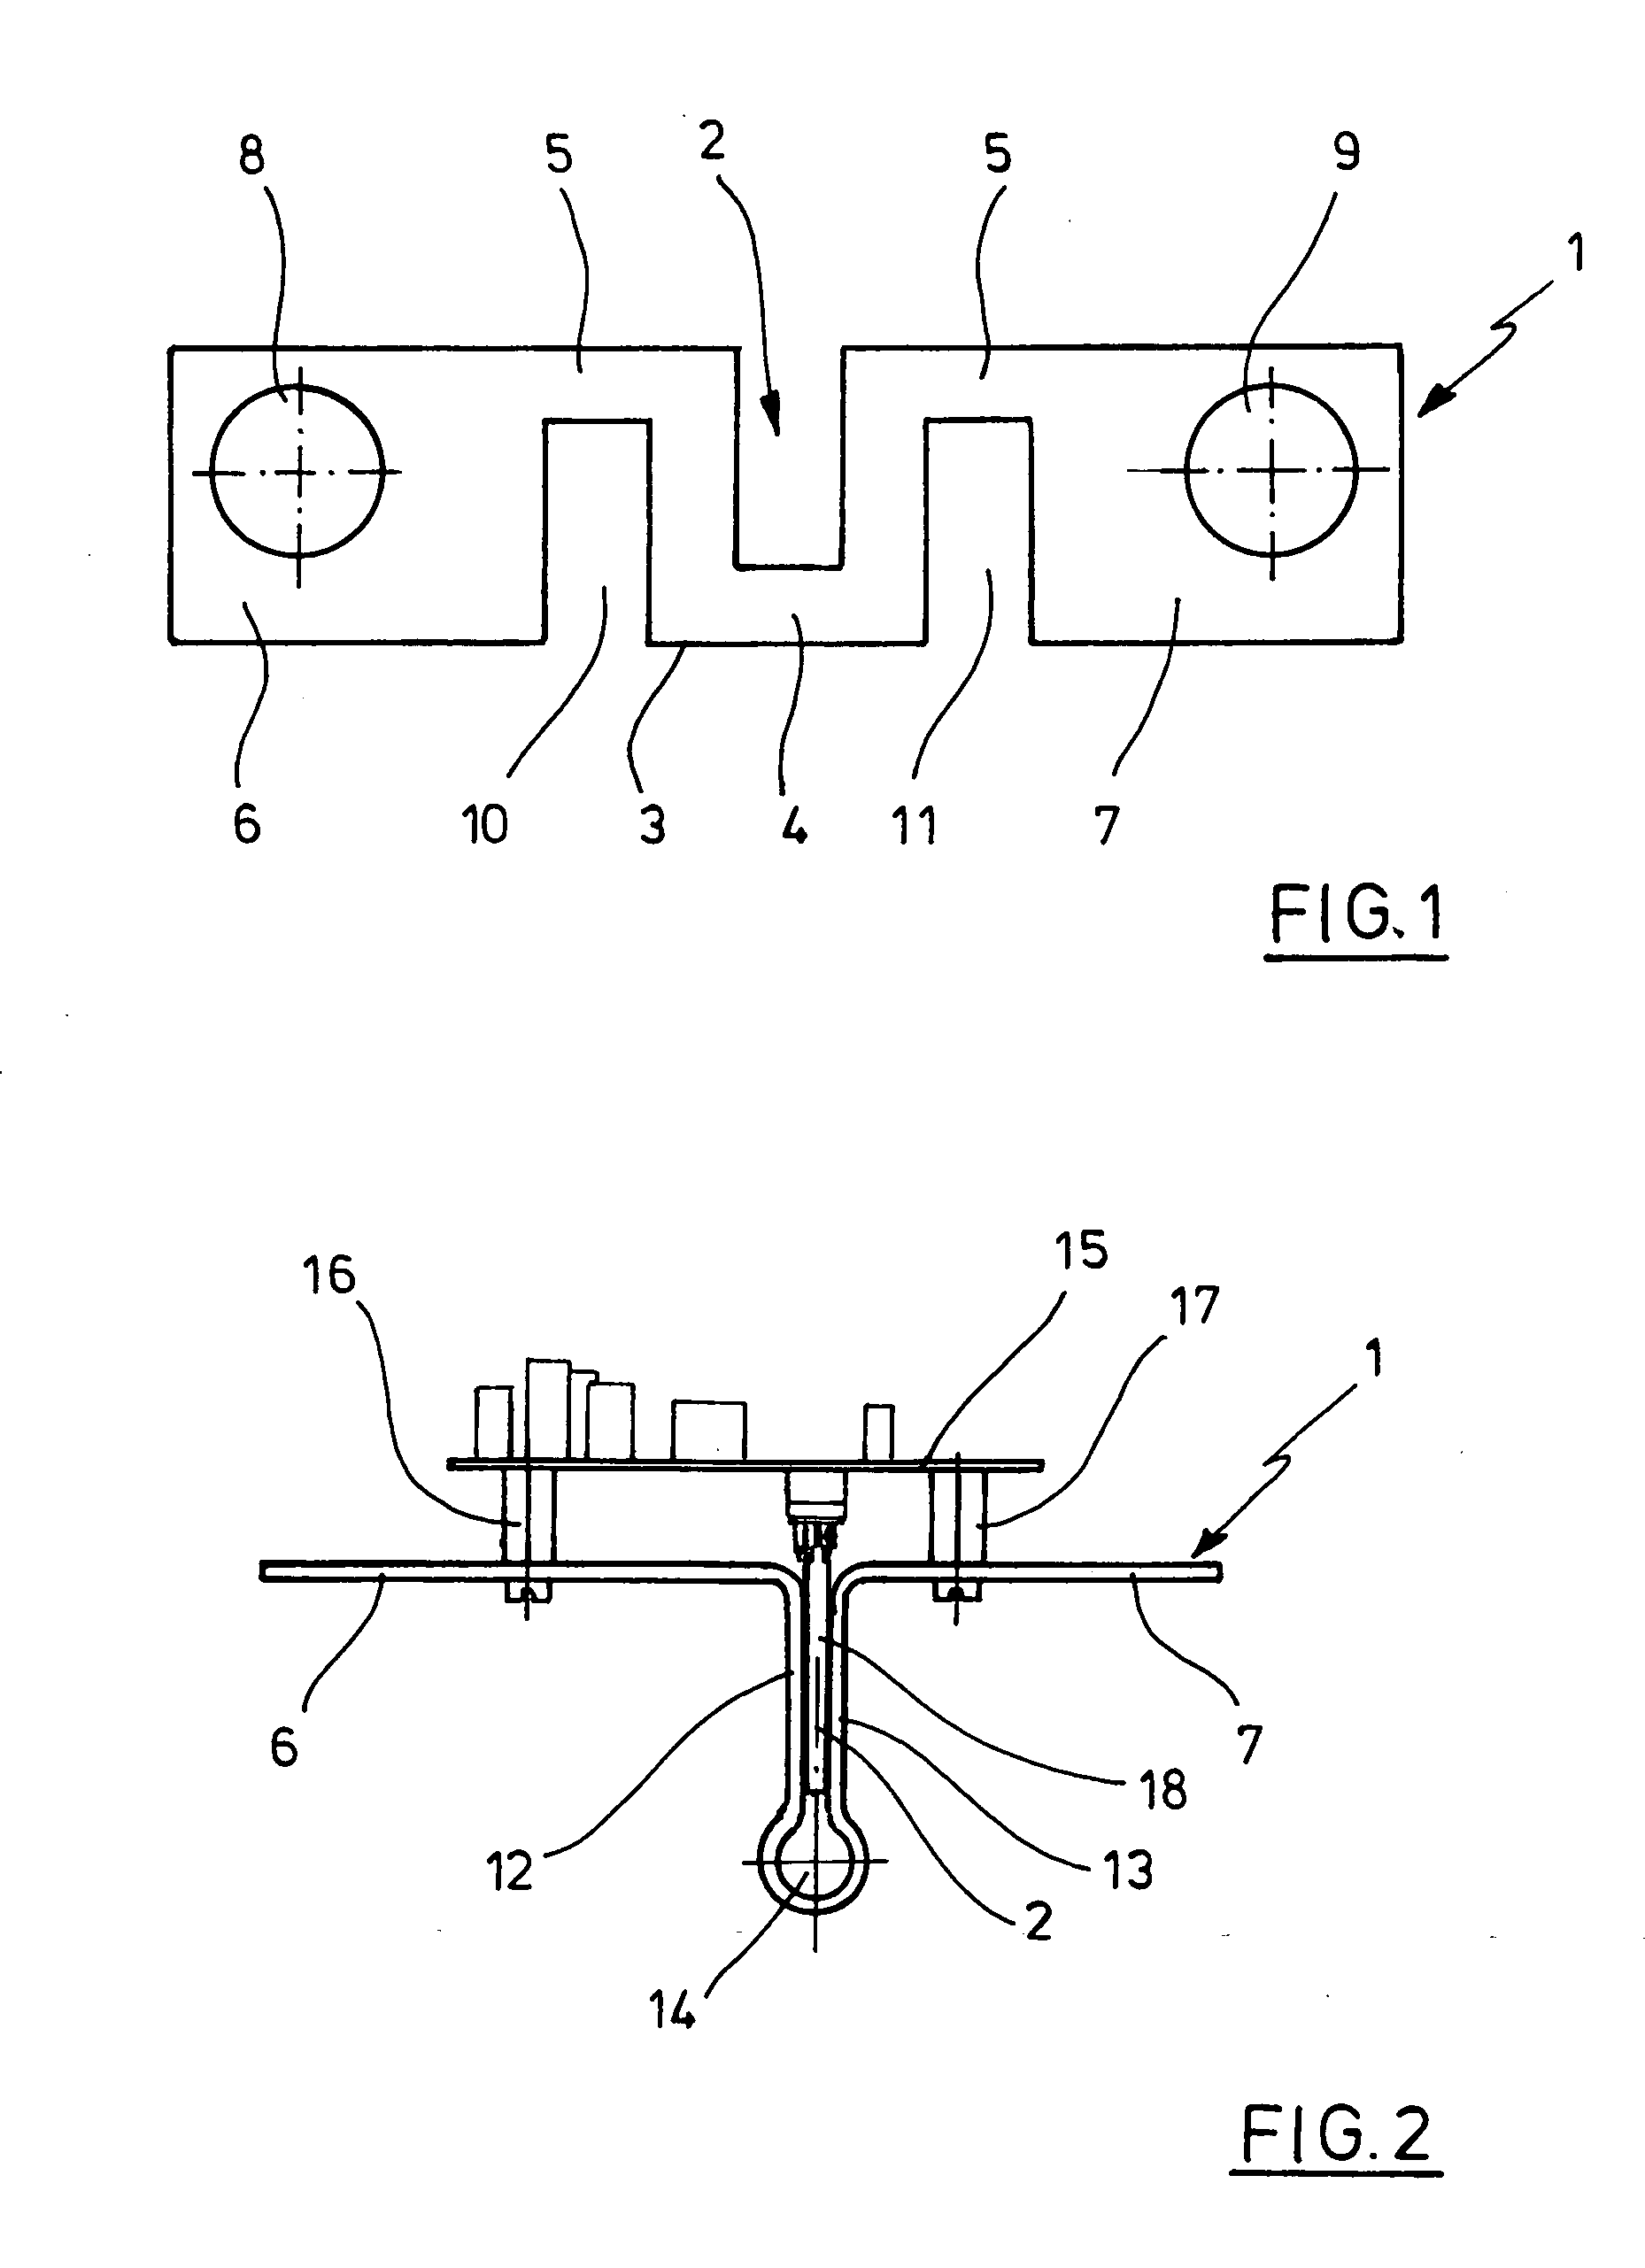 Method and apparatus for measuring electric currents